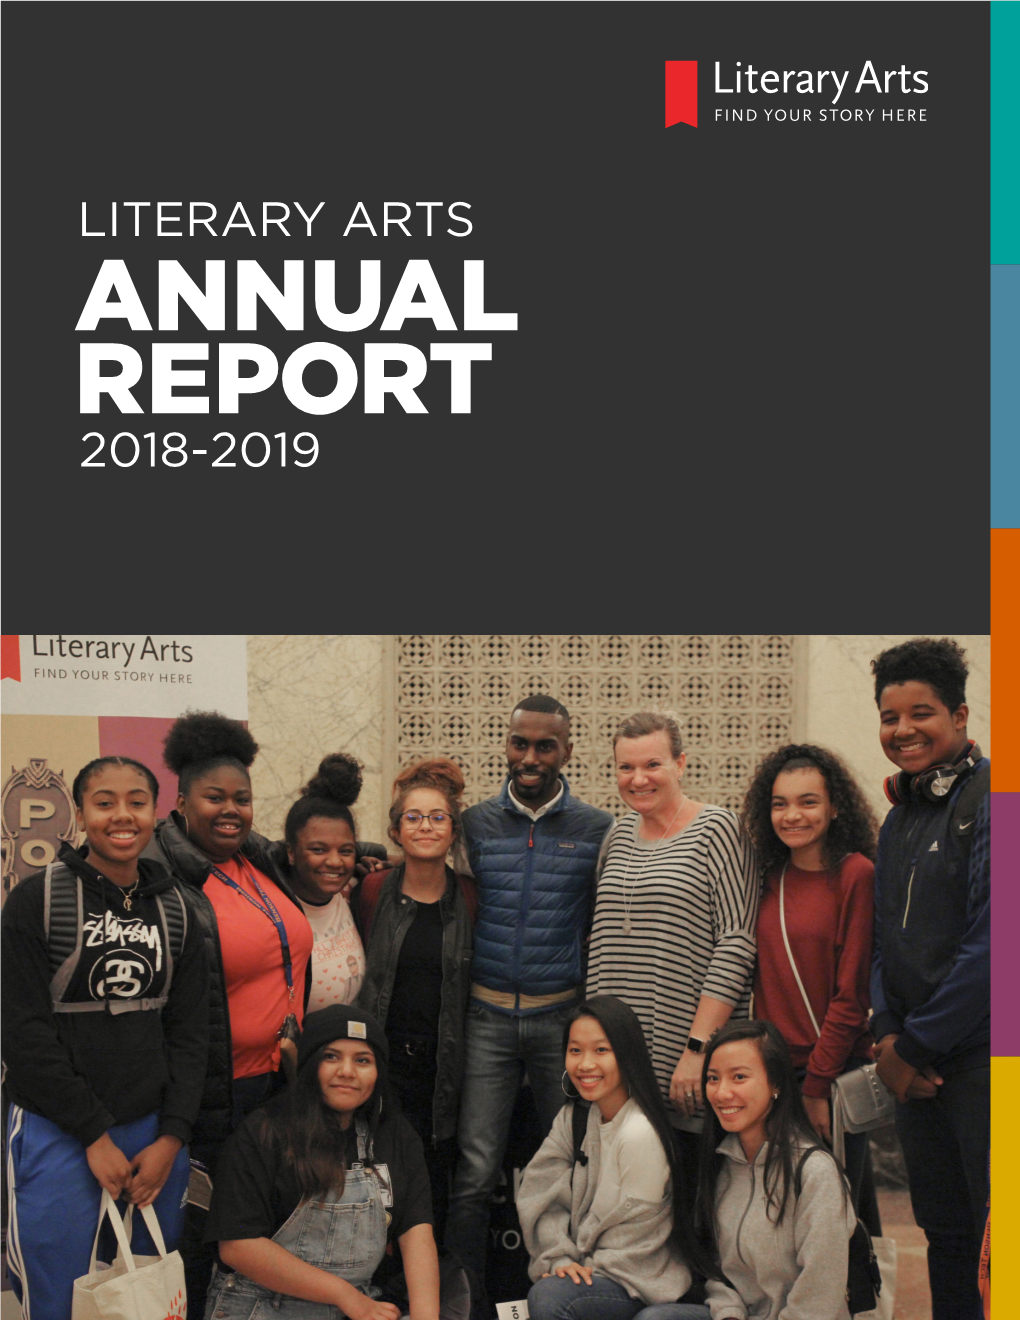 To Read Our 2018/2019 Annual Report